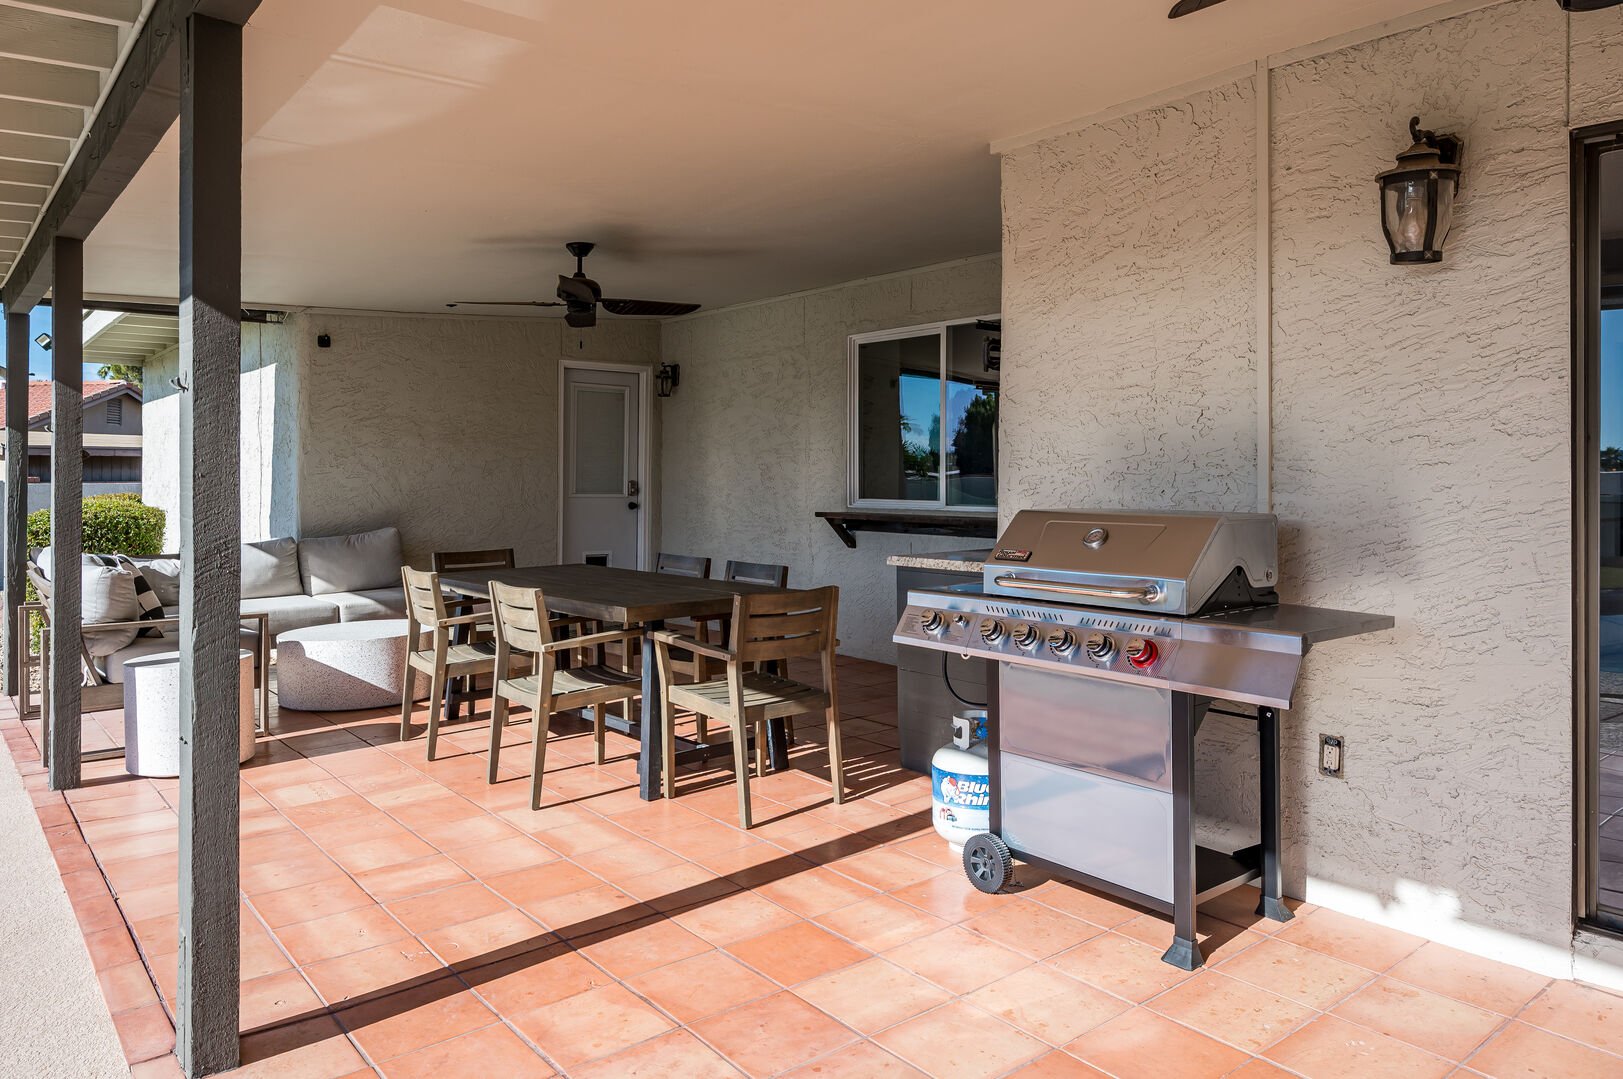 BBQ grill and outdoor dining for 6